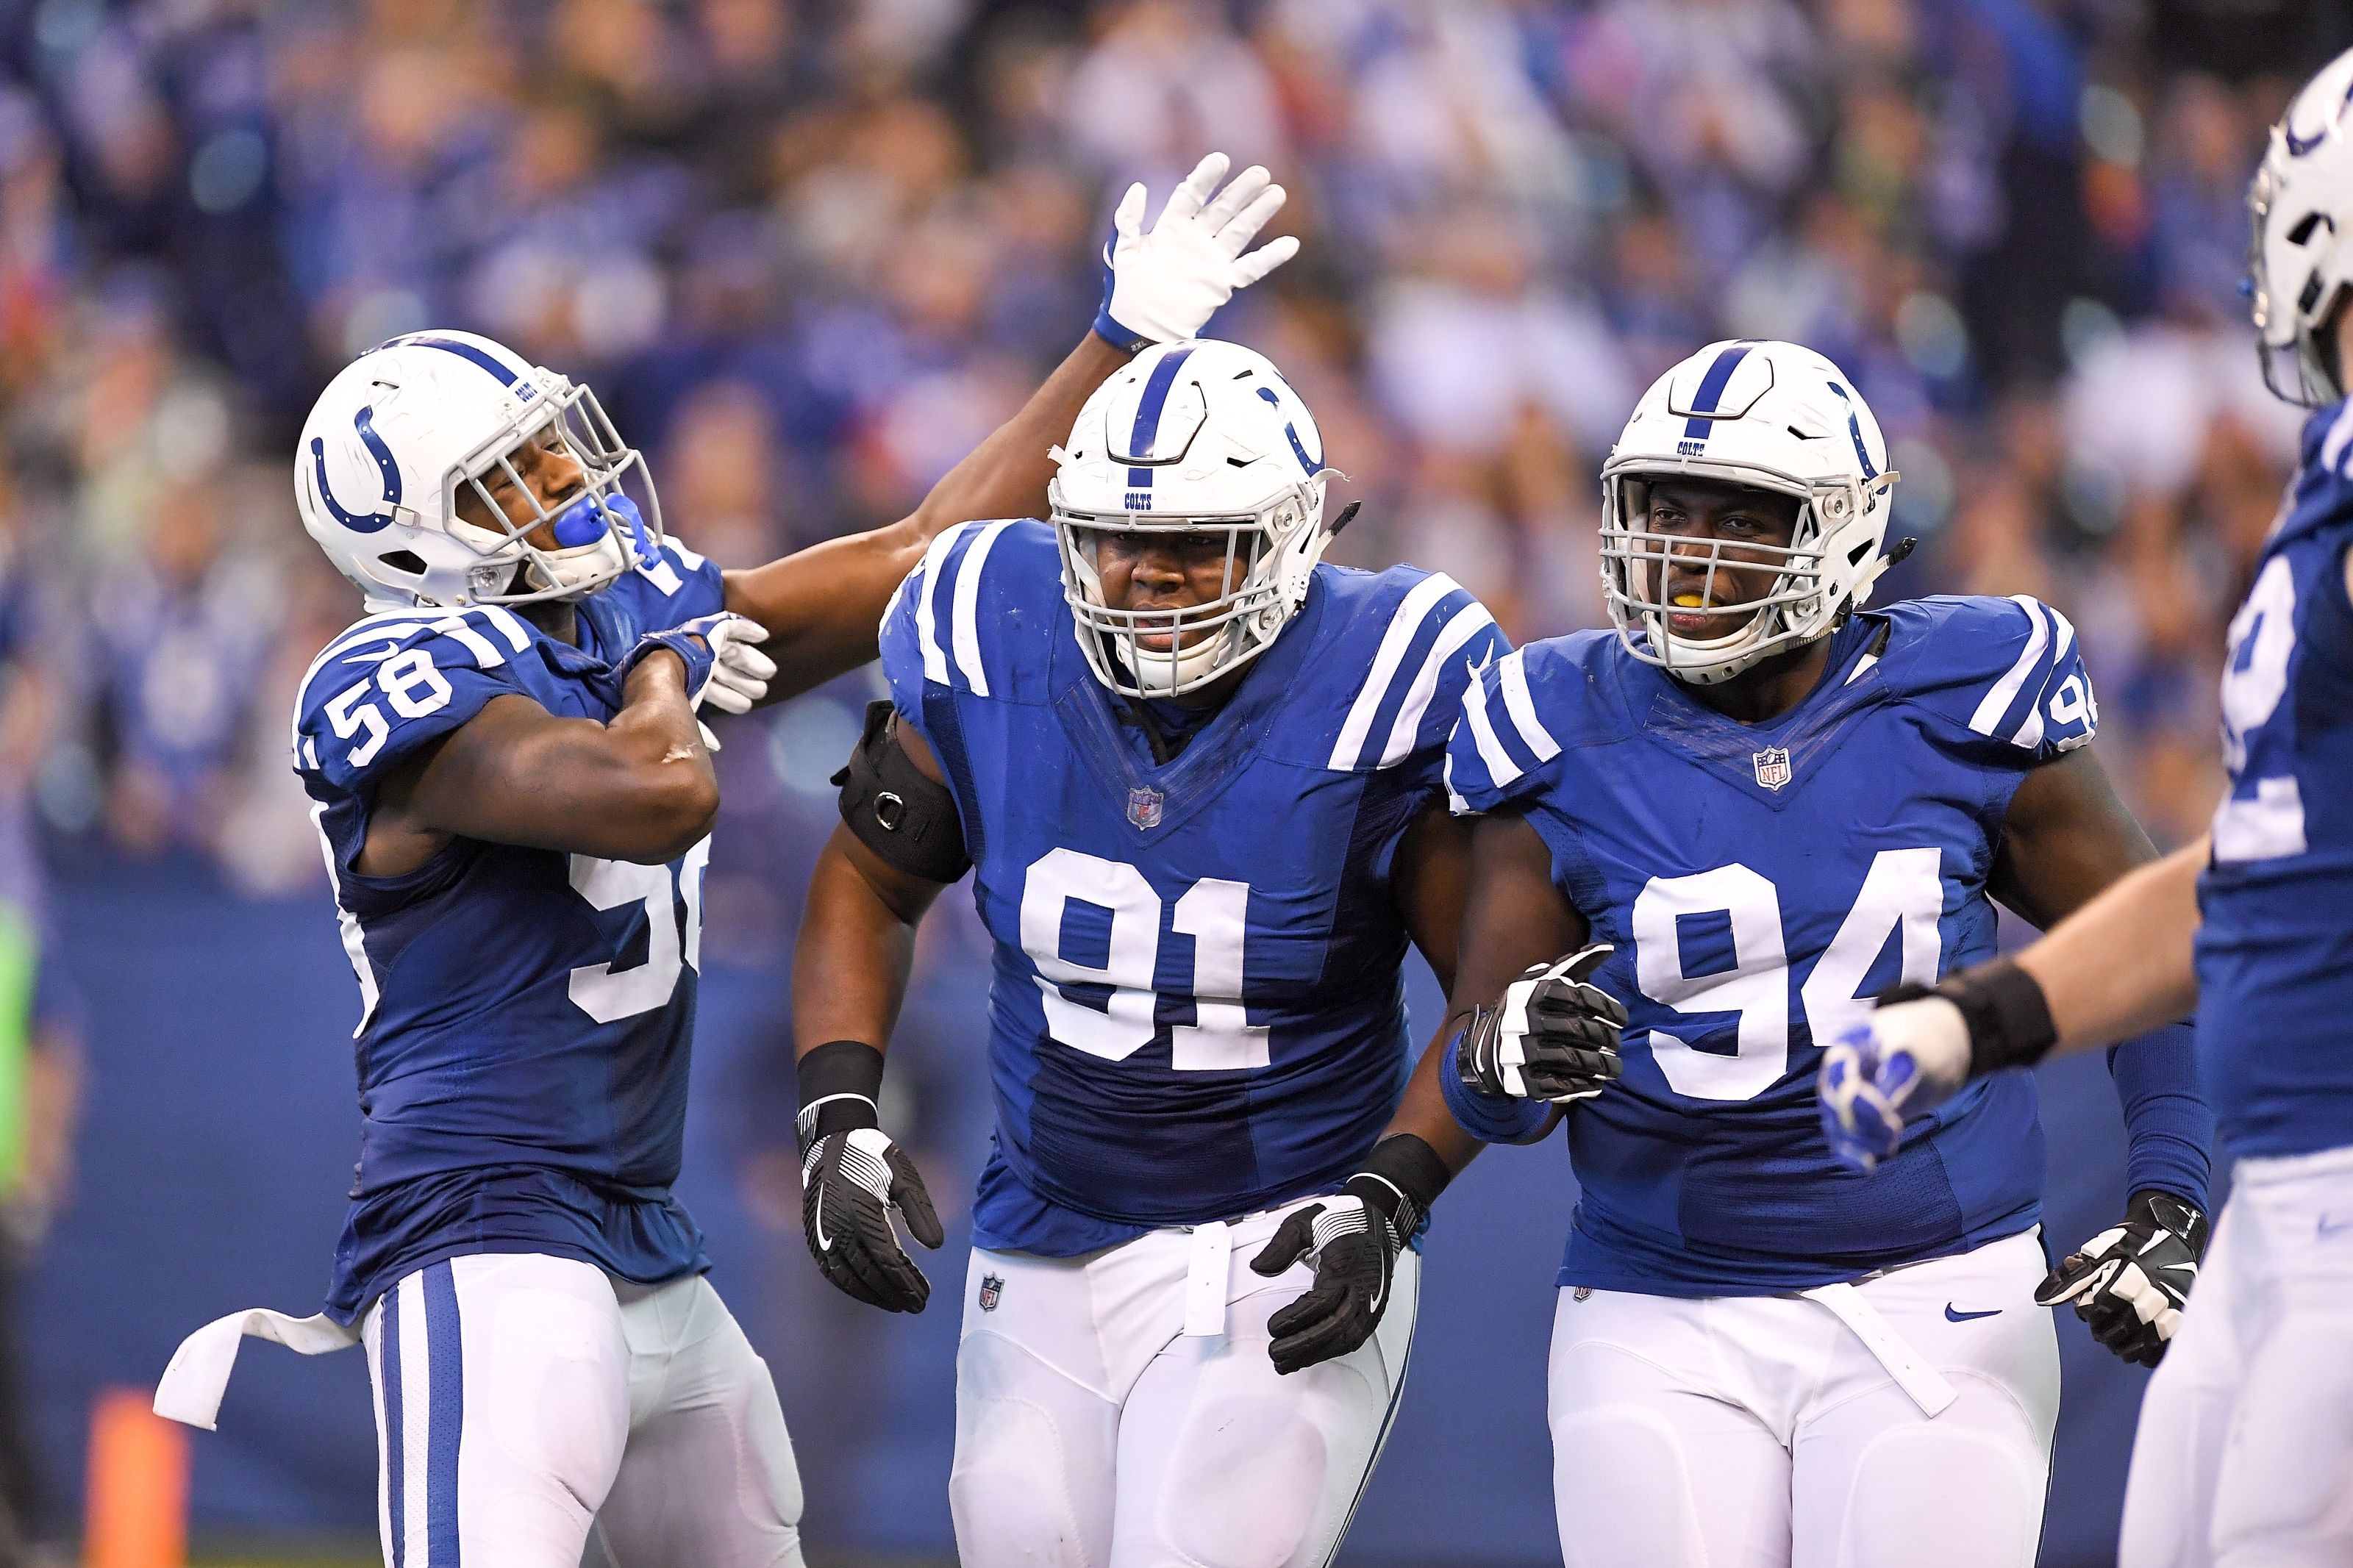 Who is the Colts’ Best Defensive Lineman?